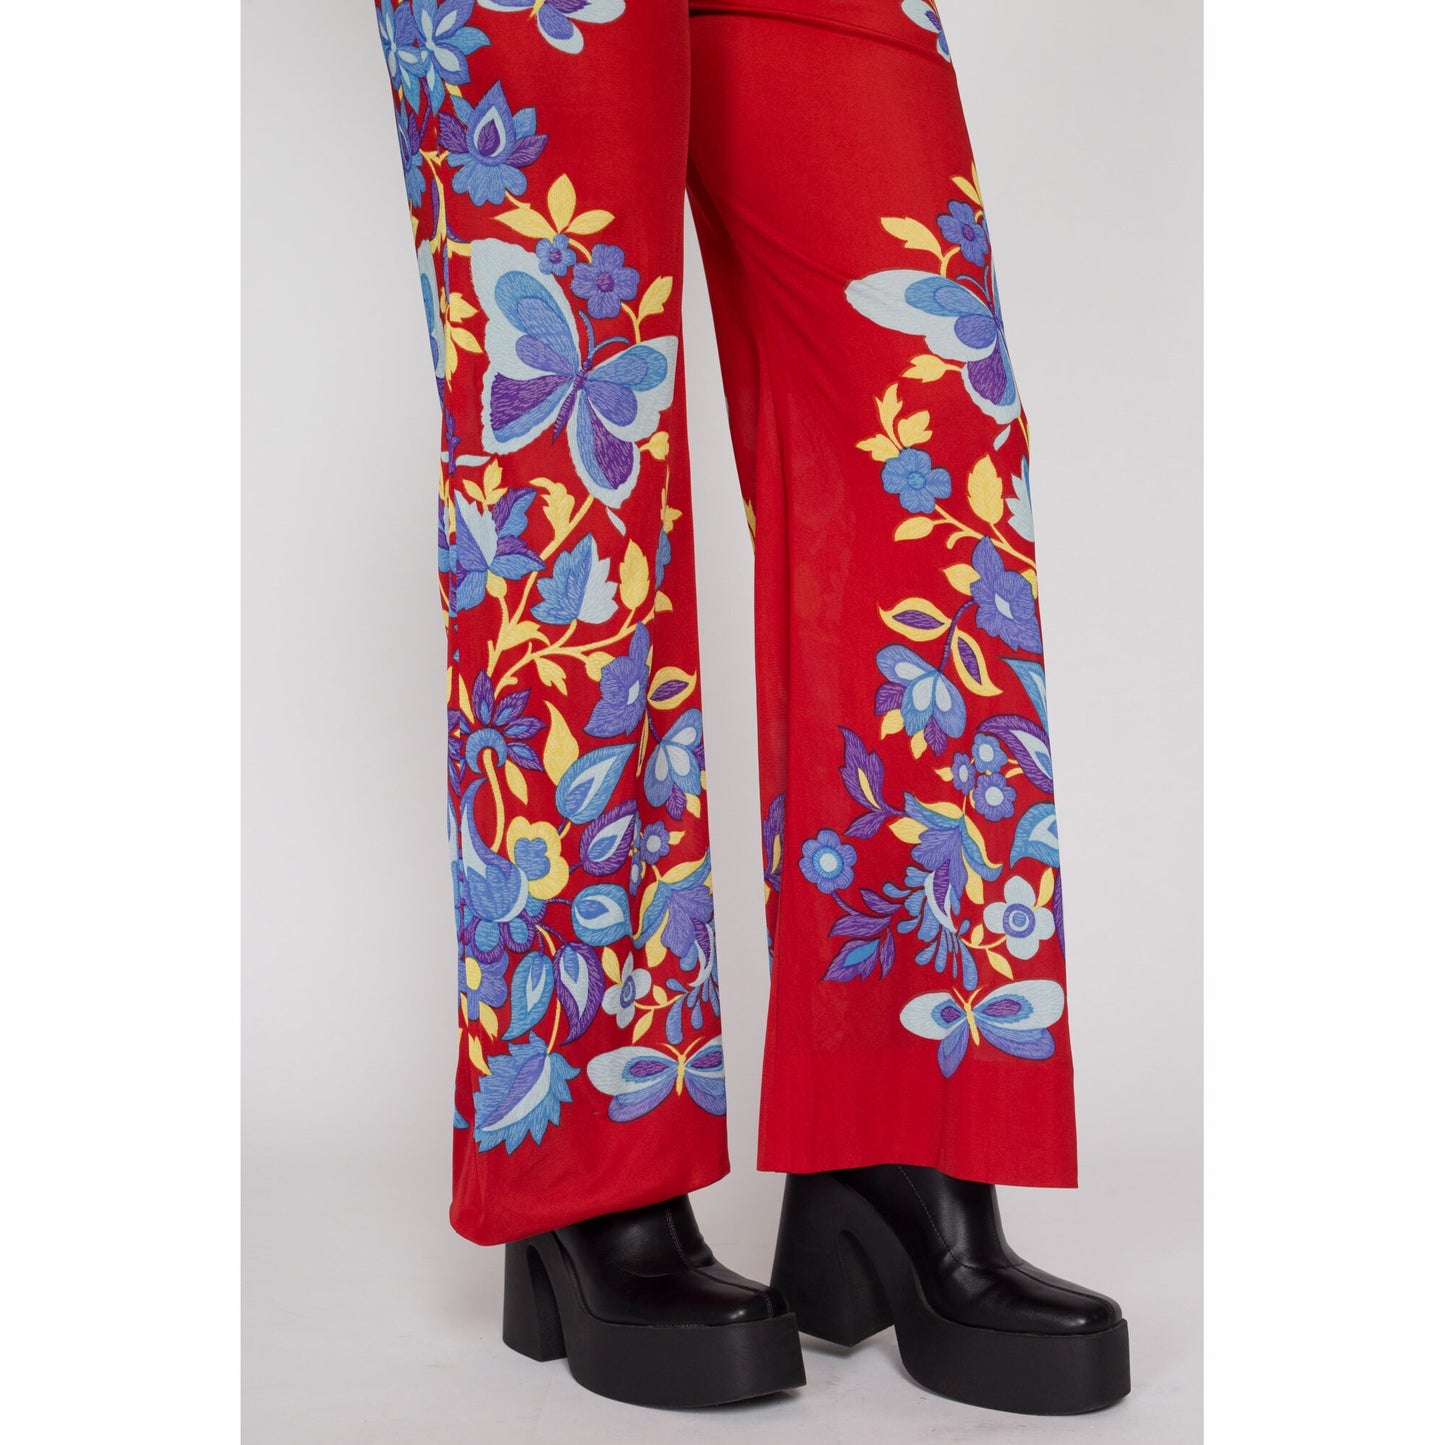 Medium 70s Red Floral & Butterfly Print Lounge Pants | Vintage High Waisted Boho Elastic Polyester Flared Trousers